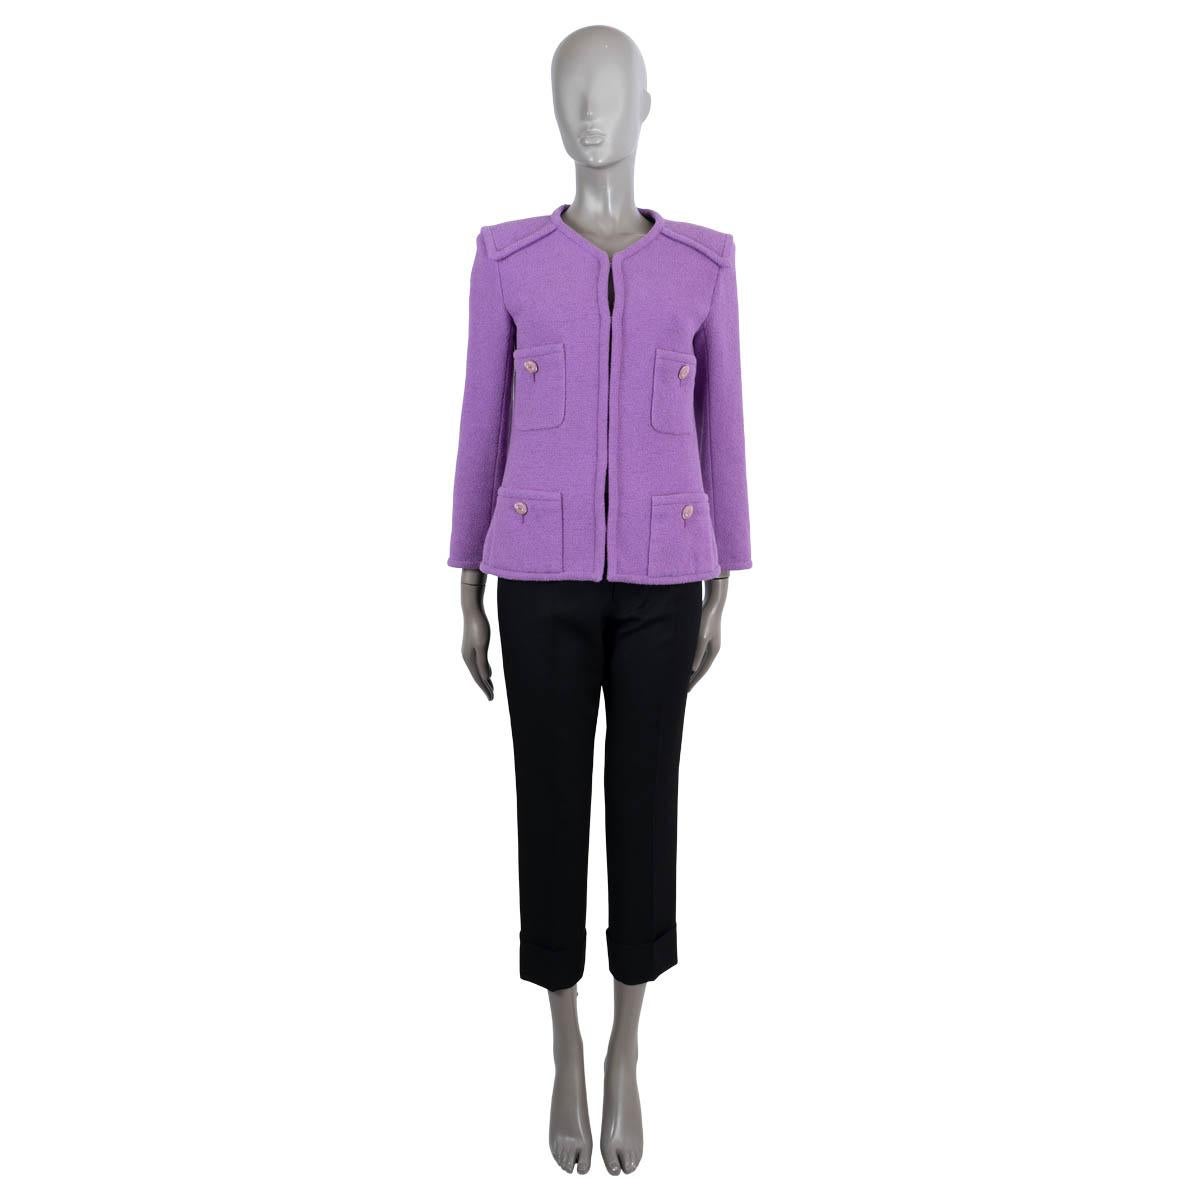 100% authentic Chanel collarless tweed jacket in purple cotton (100%). Features a slight V-neck, four buttoned patch pockets and shoulder patches. Closes with concealed hook and eyes on the front and is lined in cotton (64%) and silk (36%). Has been